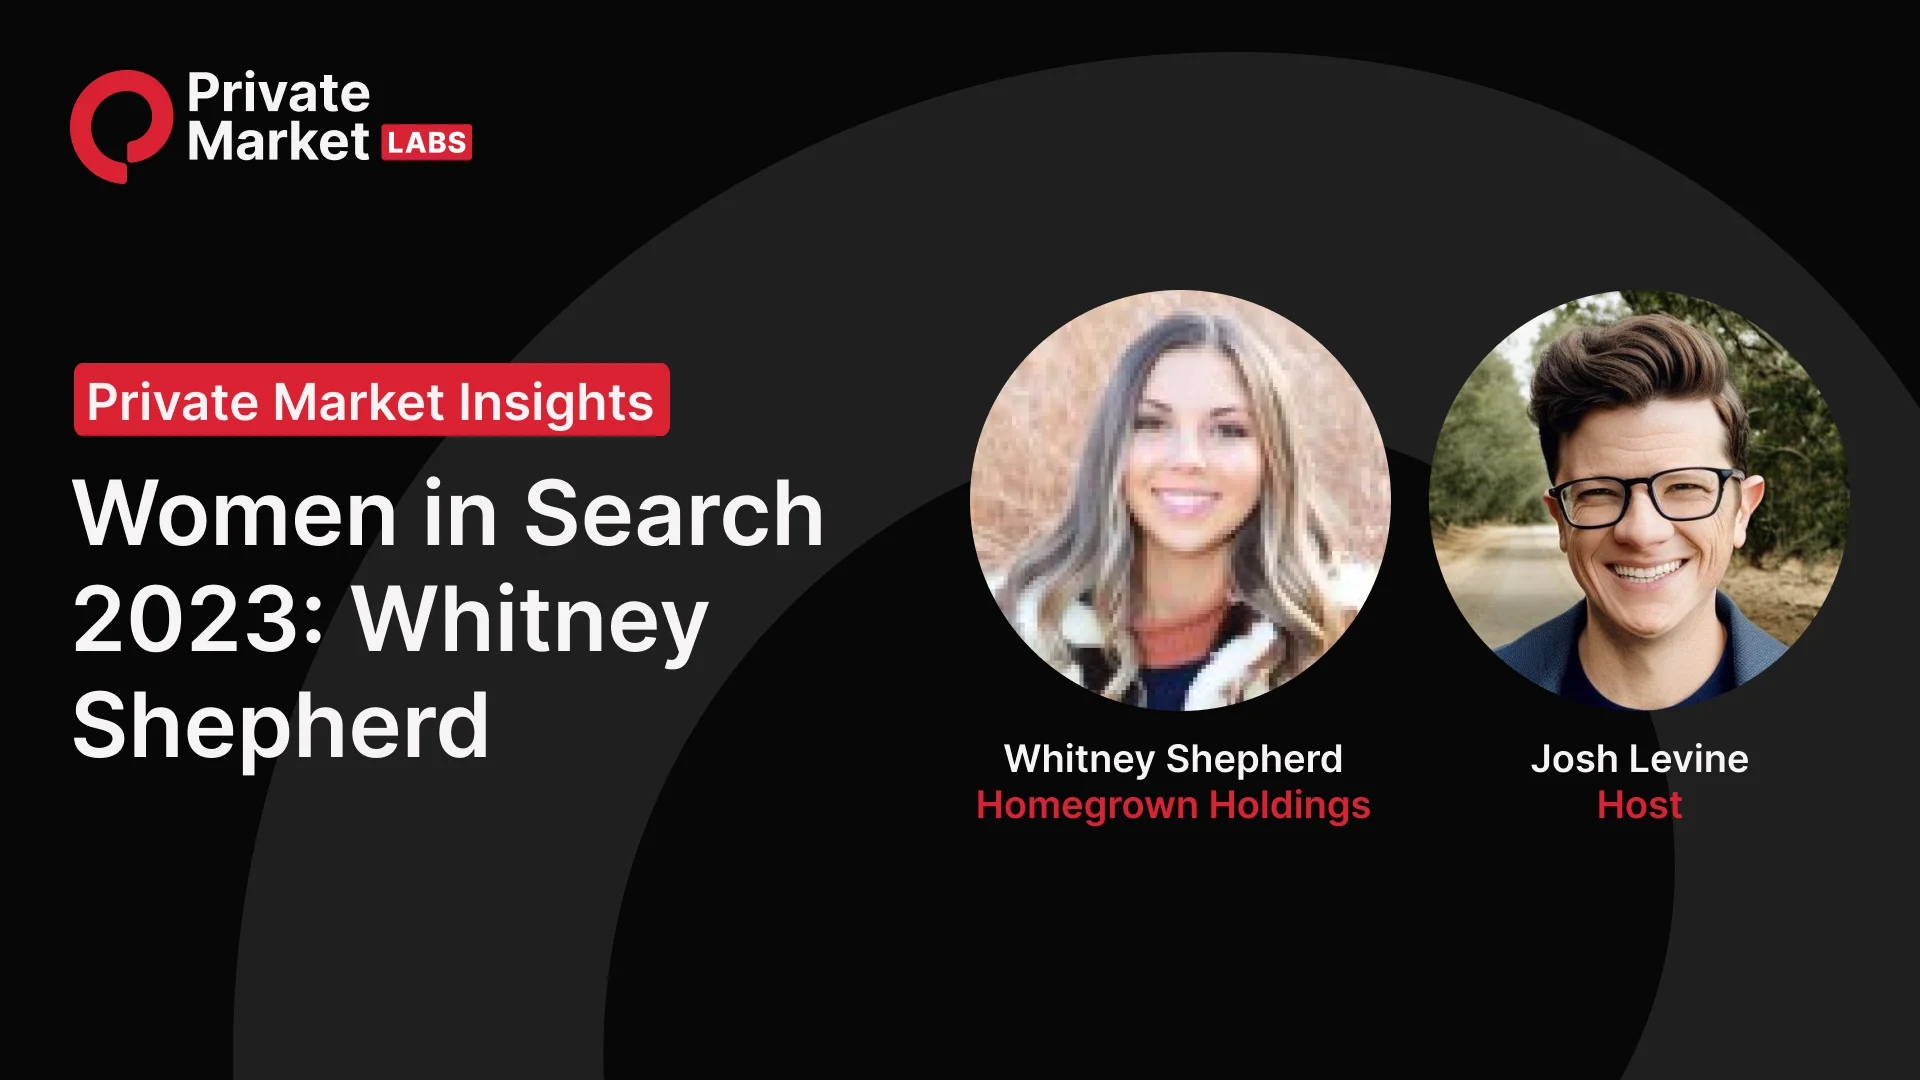 Women in Search 2023 with Whitney Shepherd – On Gender Diversity in Entrepreneurship Through Acquisition